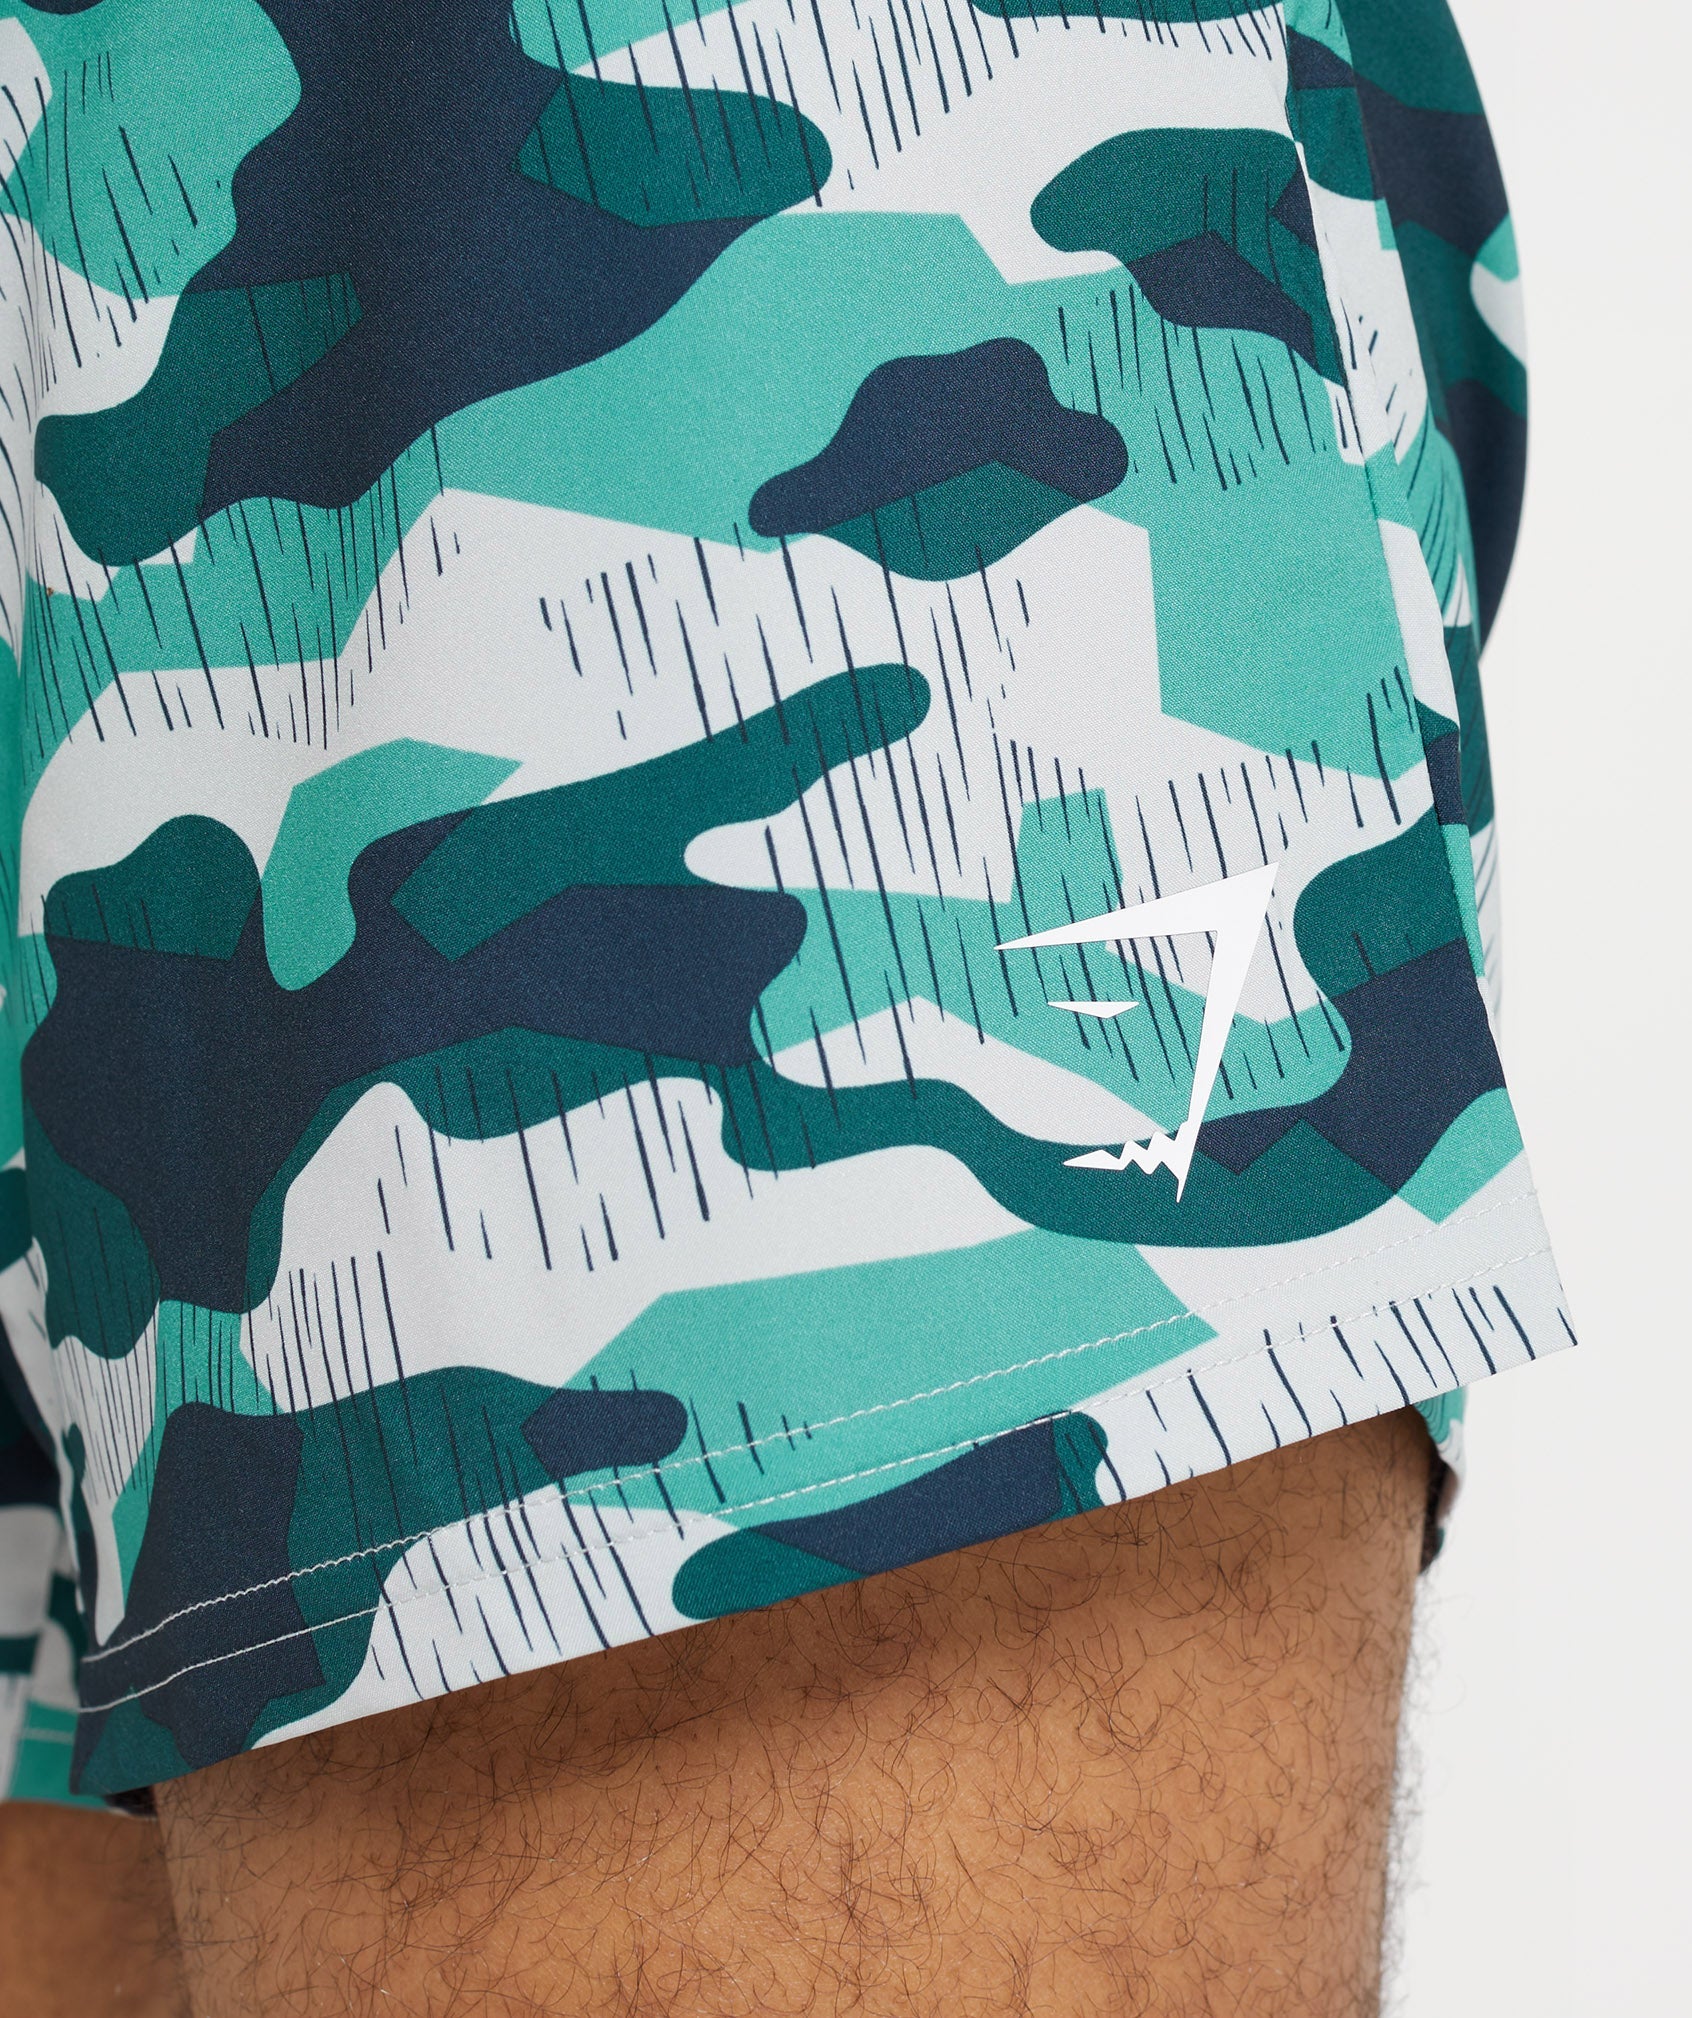 Arrival 7" Short in Fauna Teal Print - view 3